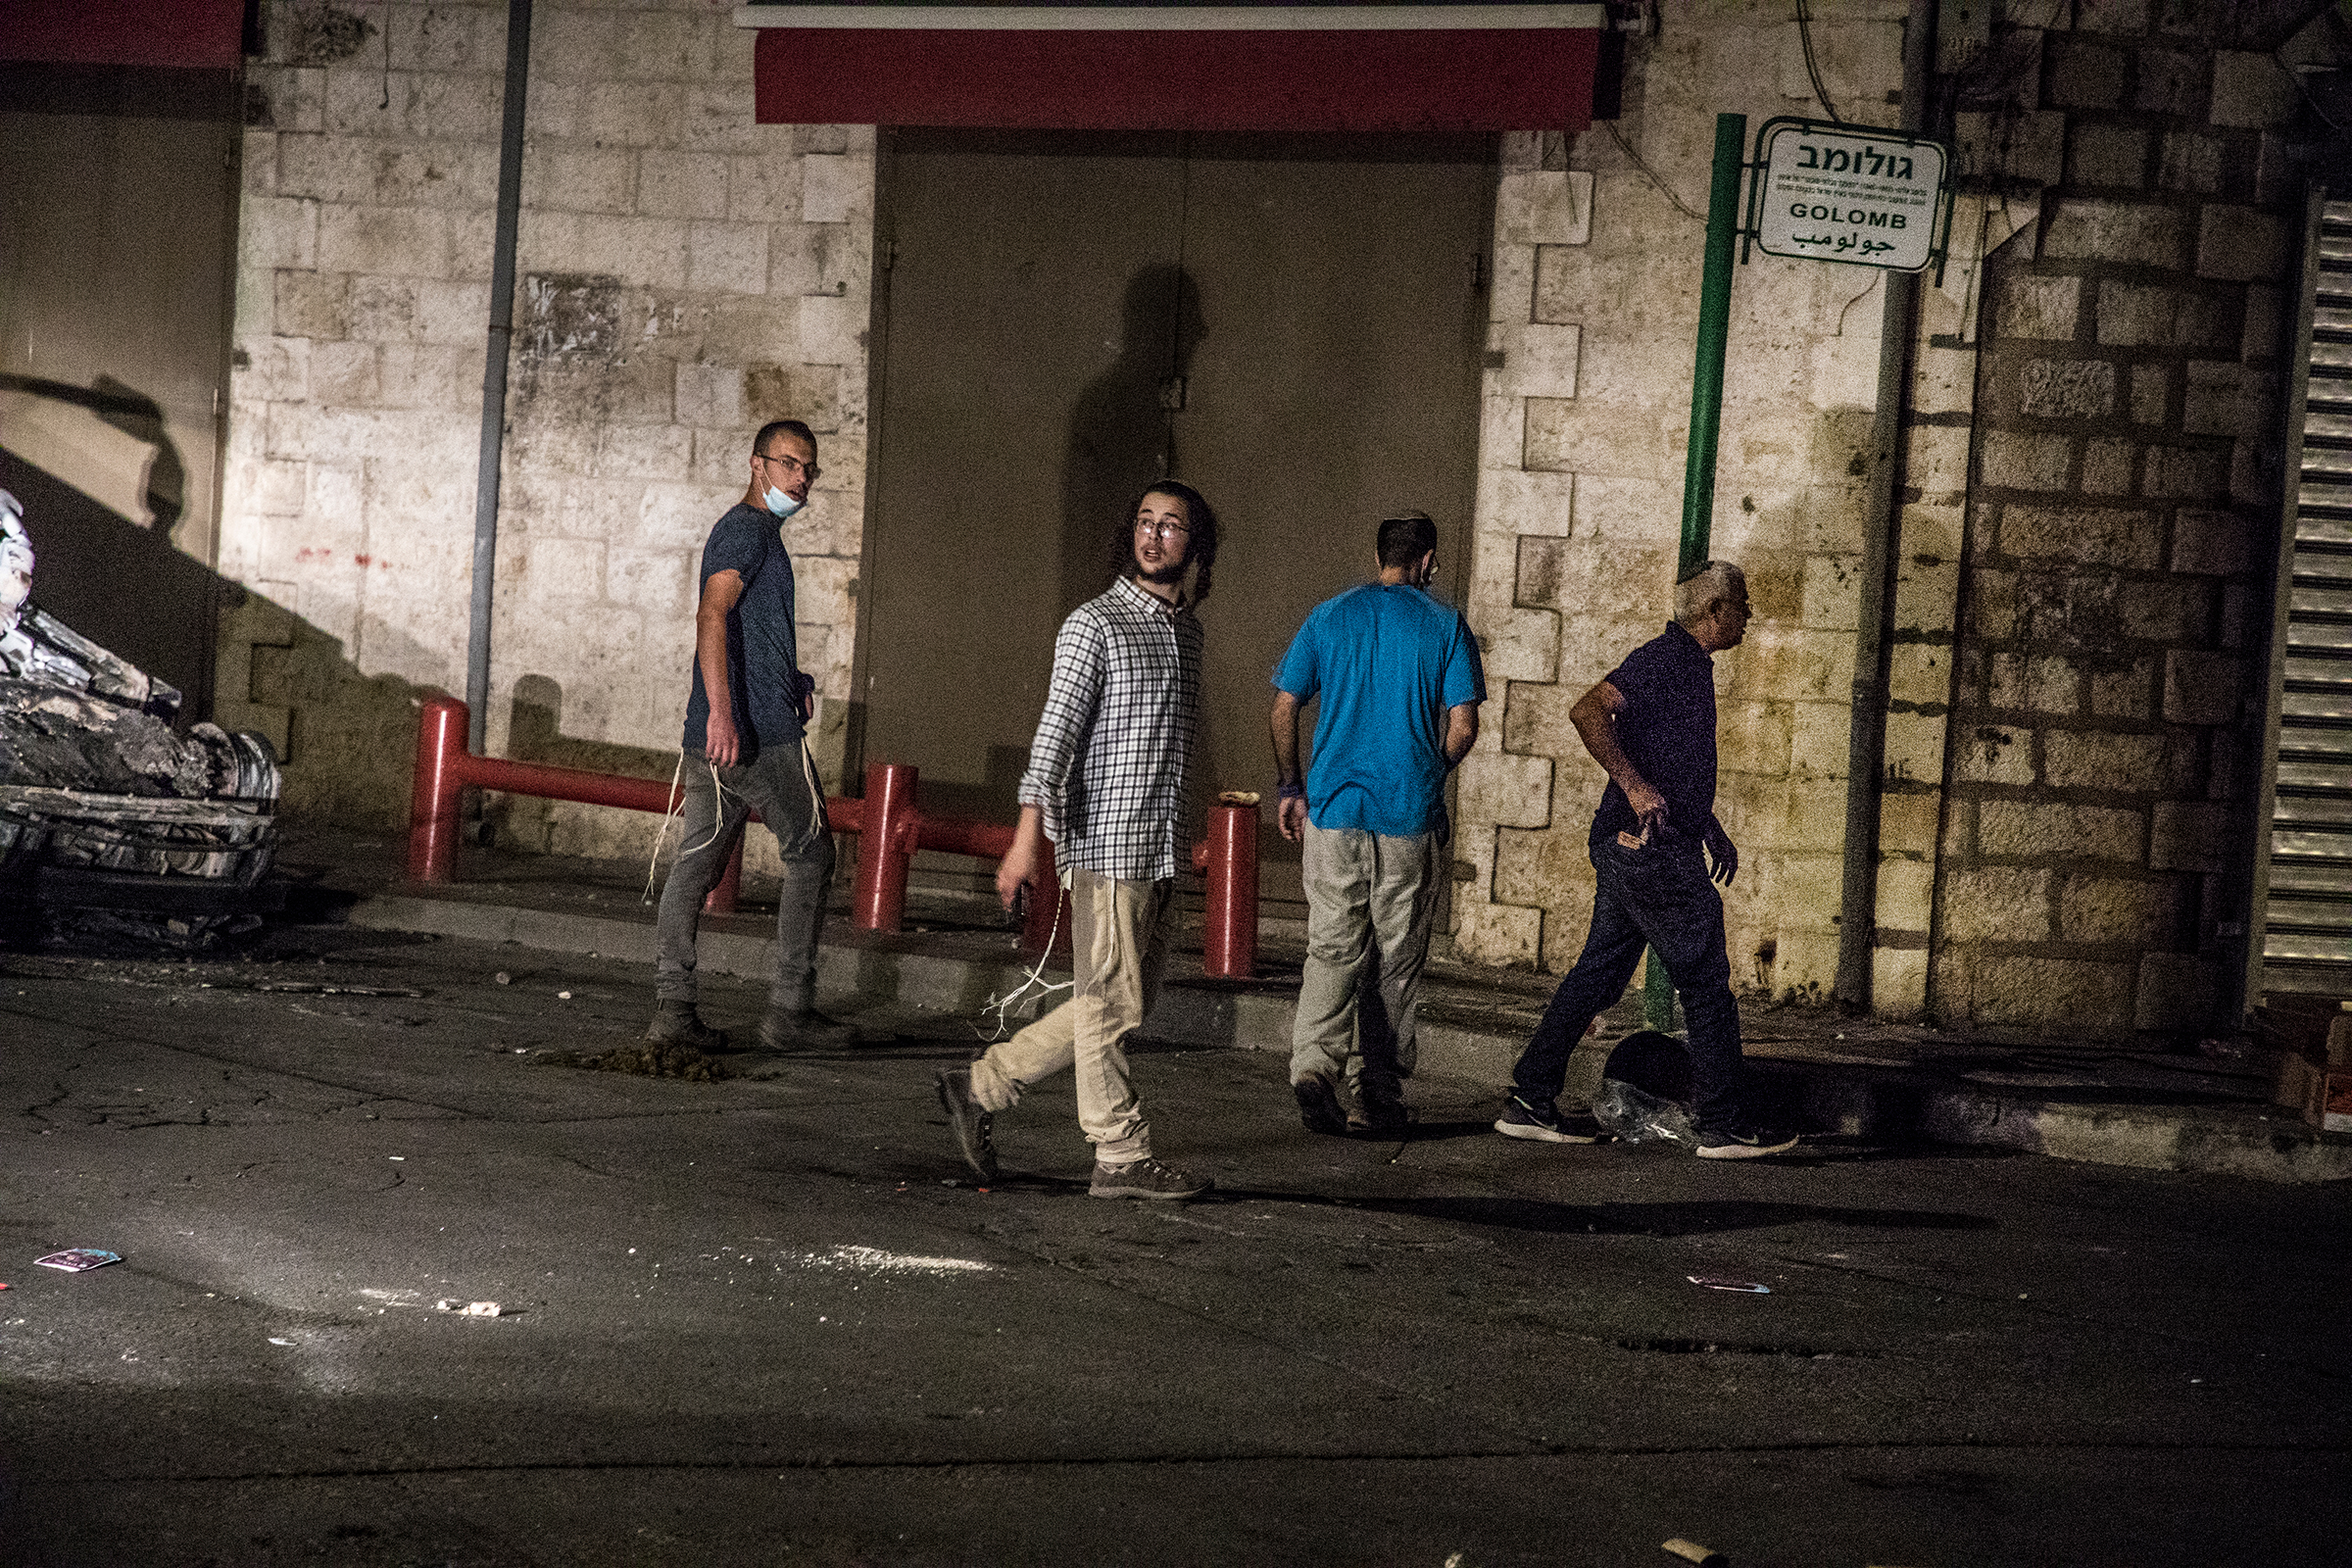 Young Jewish men from a group comprising settlers and extreme right-wing activists, mostly armed, try to approach the downtown mosque in the mixed city of Lod, Israel, on May 12. (Laurent Van Der Stockt—Getty Images)